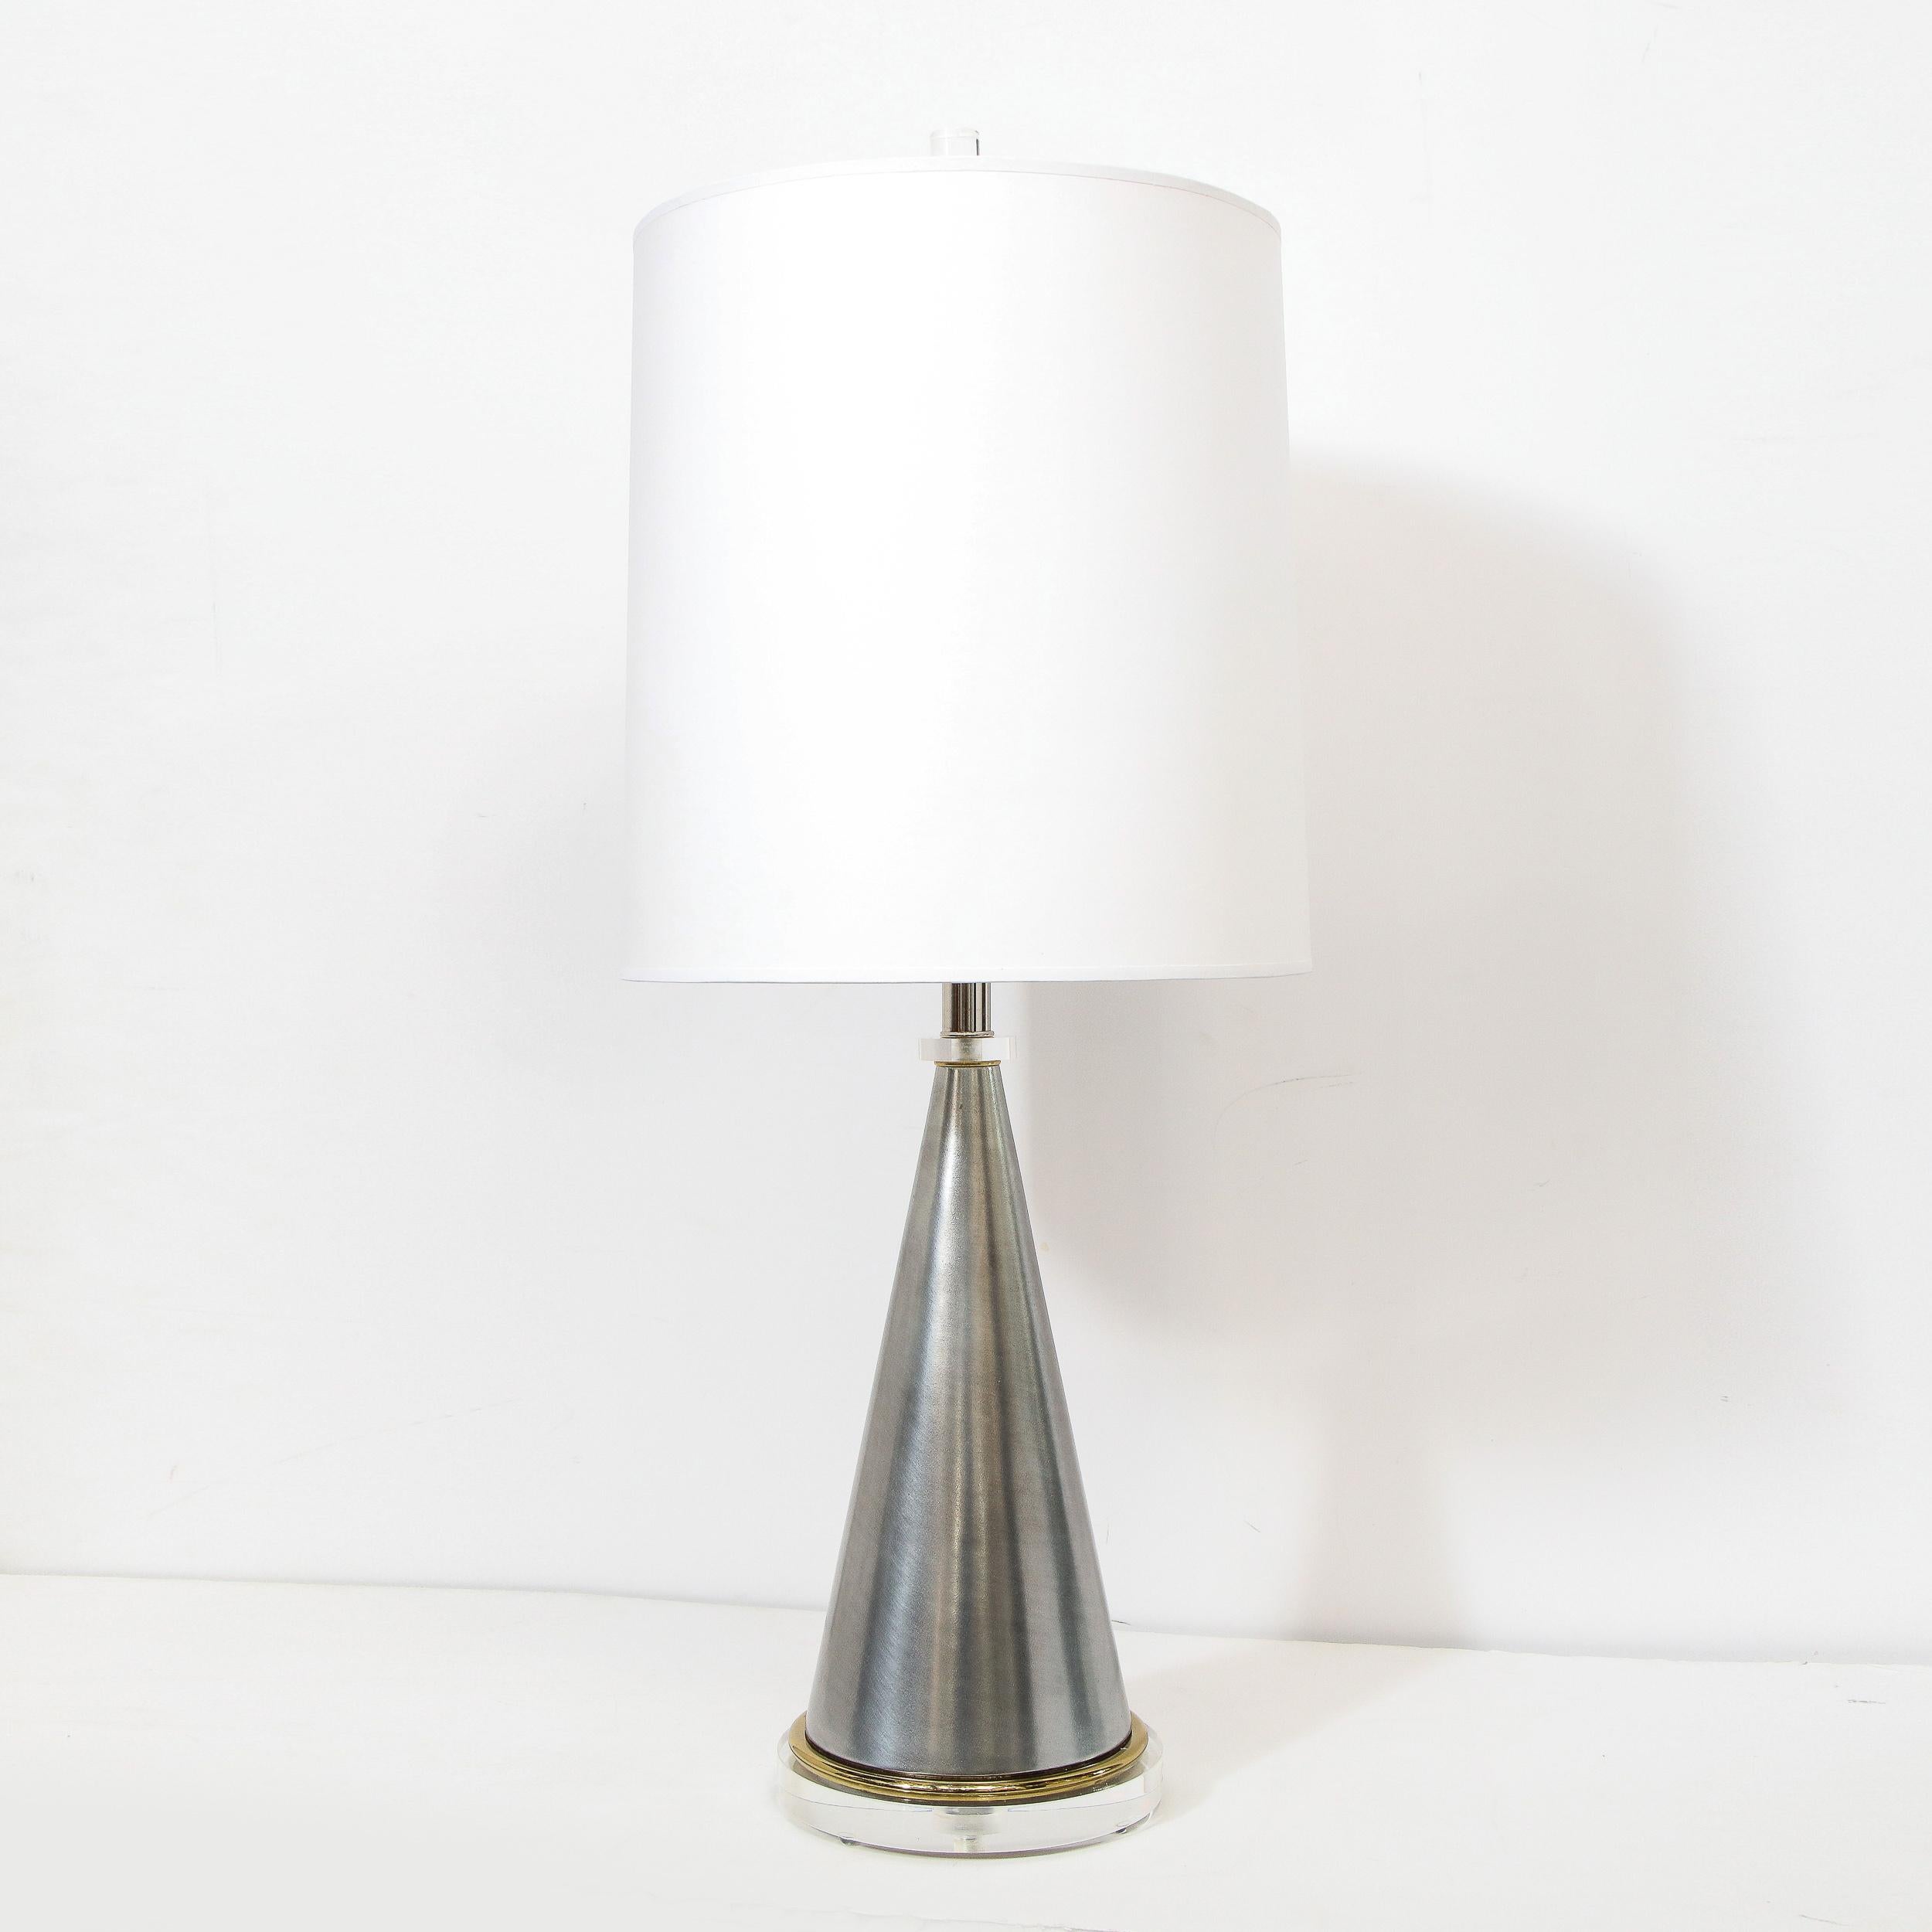 Mid-20th Century Midcentury Brushed Aluminum, Brass and Translucent Lucite Conical Table Lamps